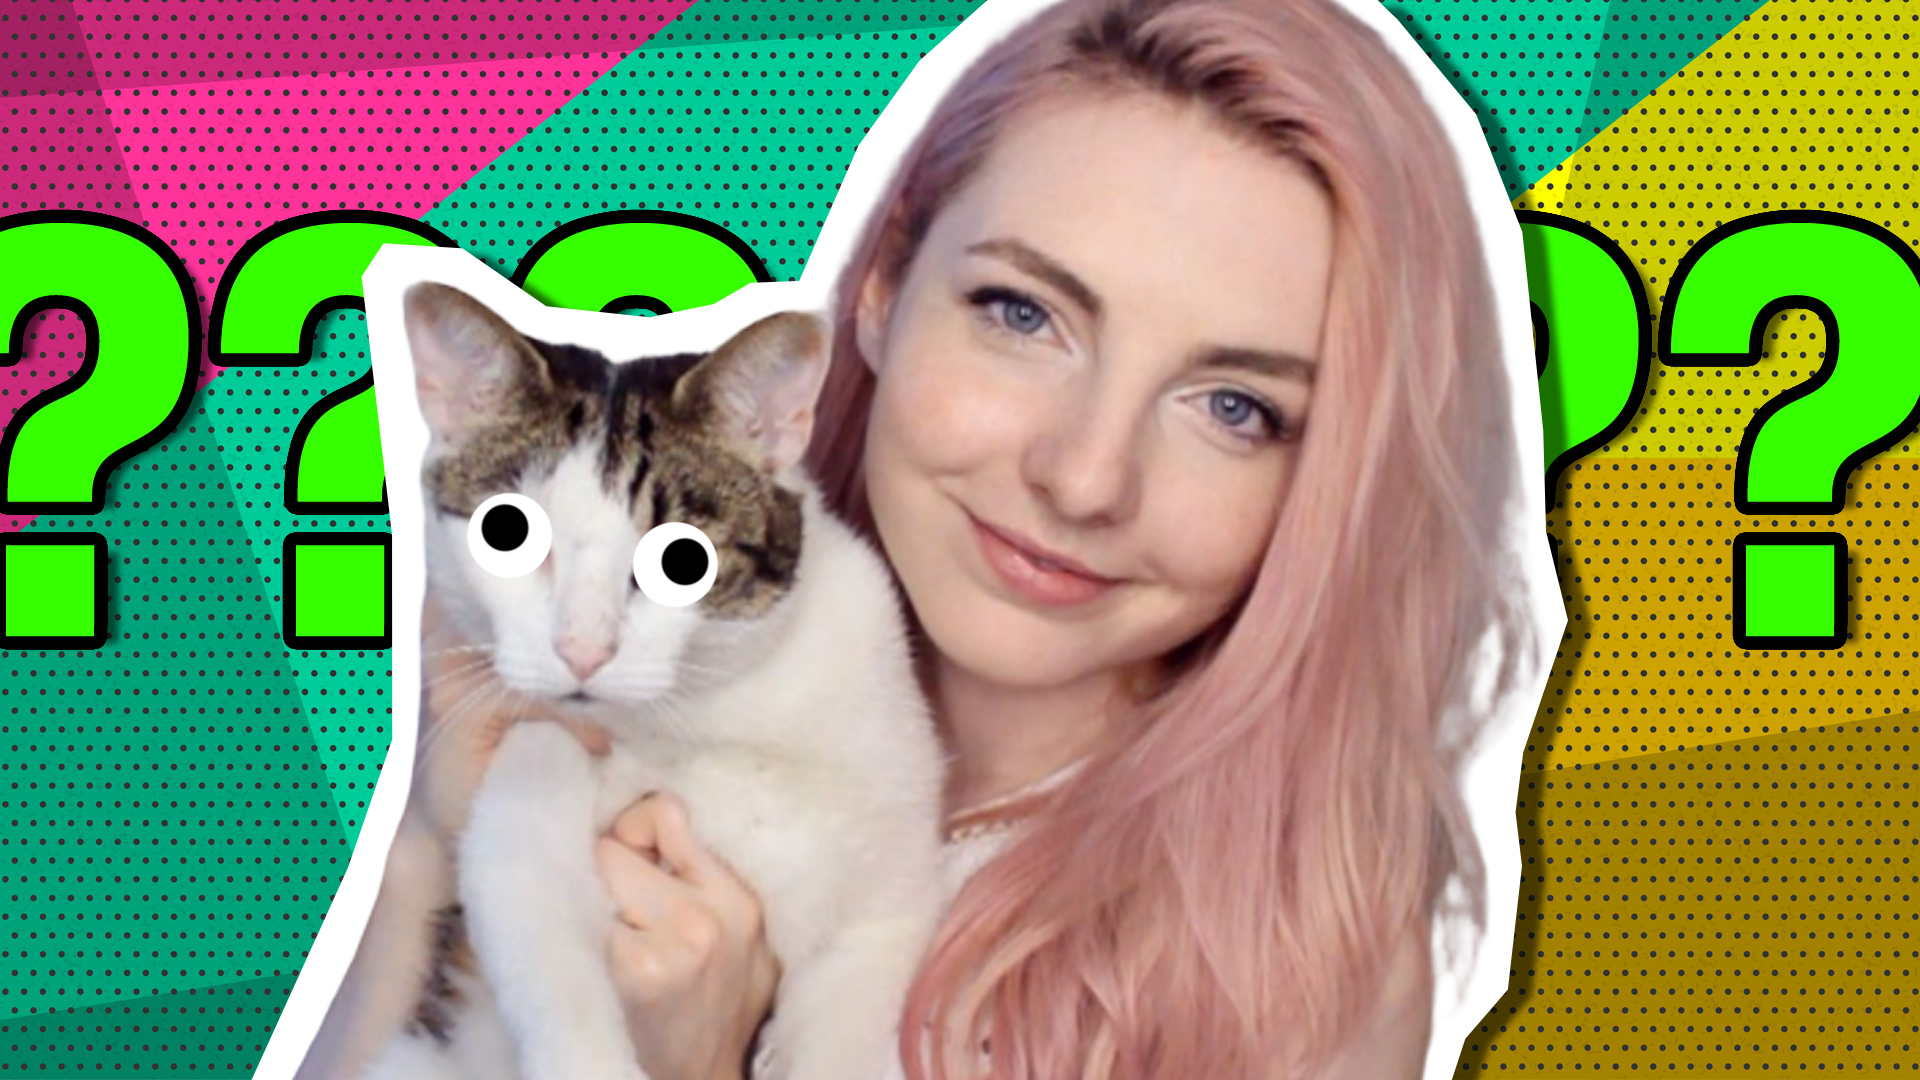 ldshadowlady and her pet cat